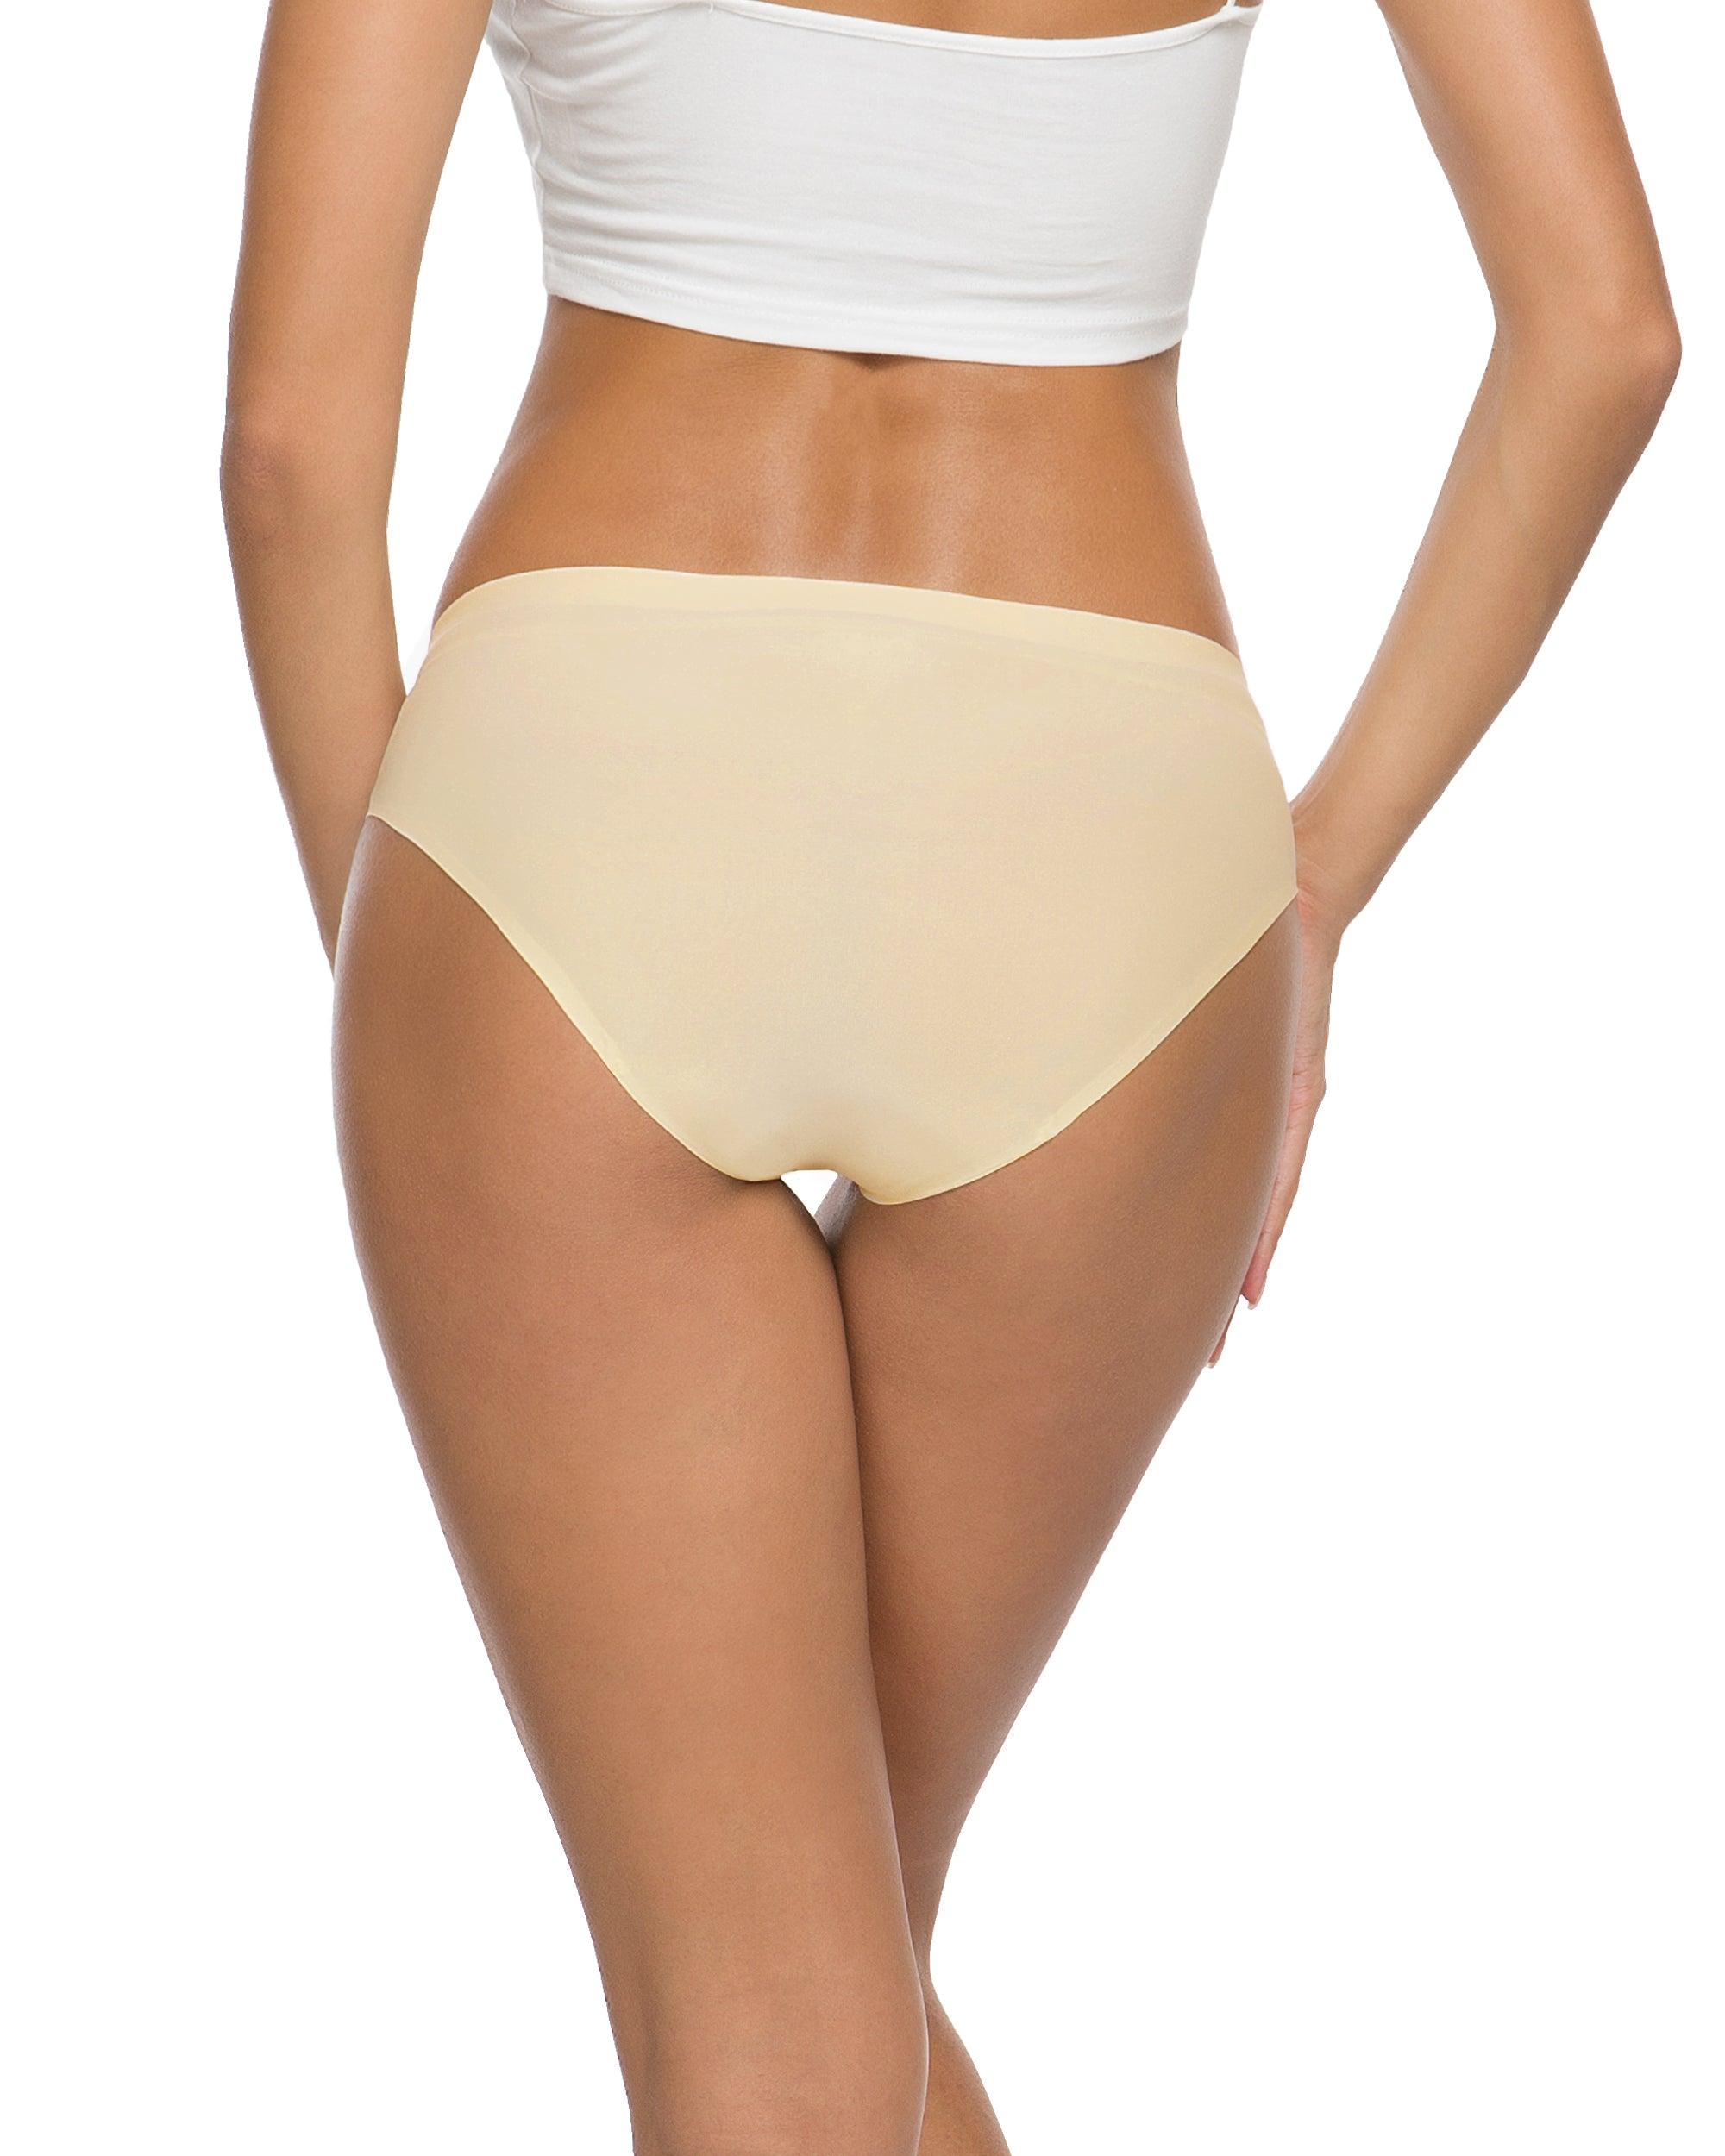 ALTHEANRAY Women’s Seamless Hipster-color 12